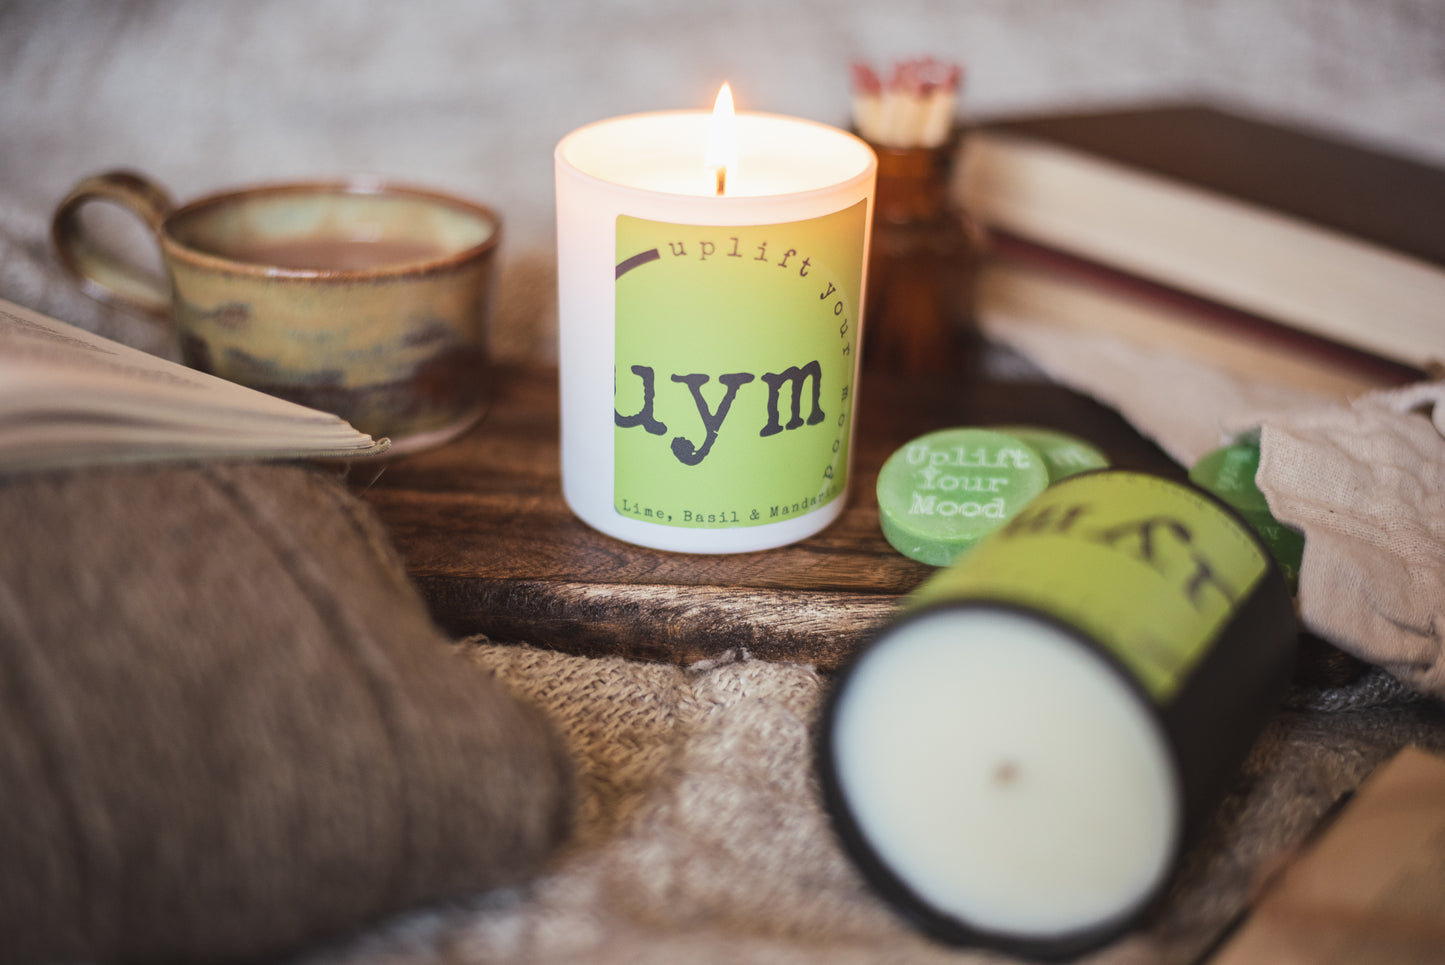 Lime, Basil & Mandarin Candle, natural wax candles, matt white and matt black glass jars, scented natural wax melts in cotton bags, Uplift Your Mood Scents